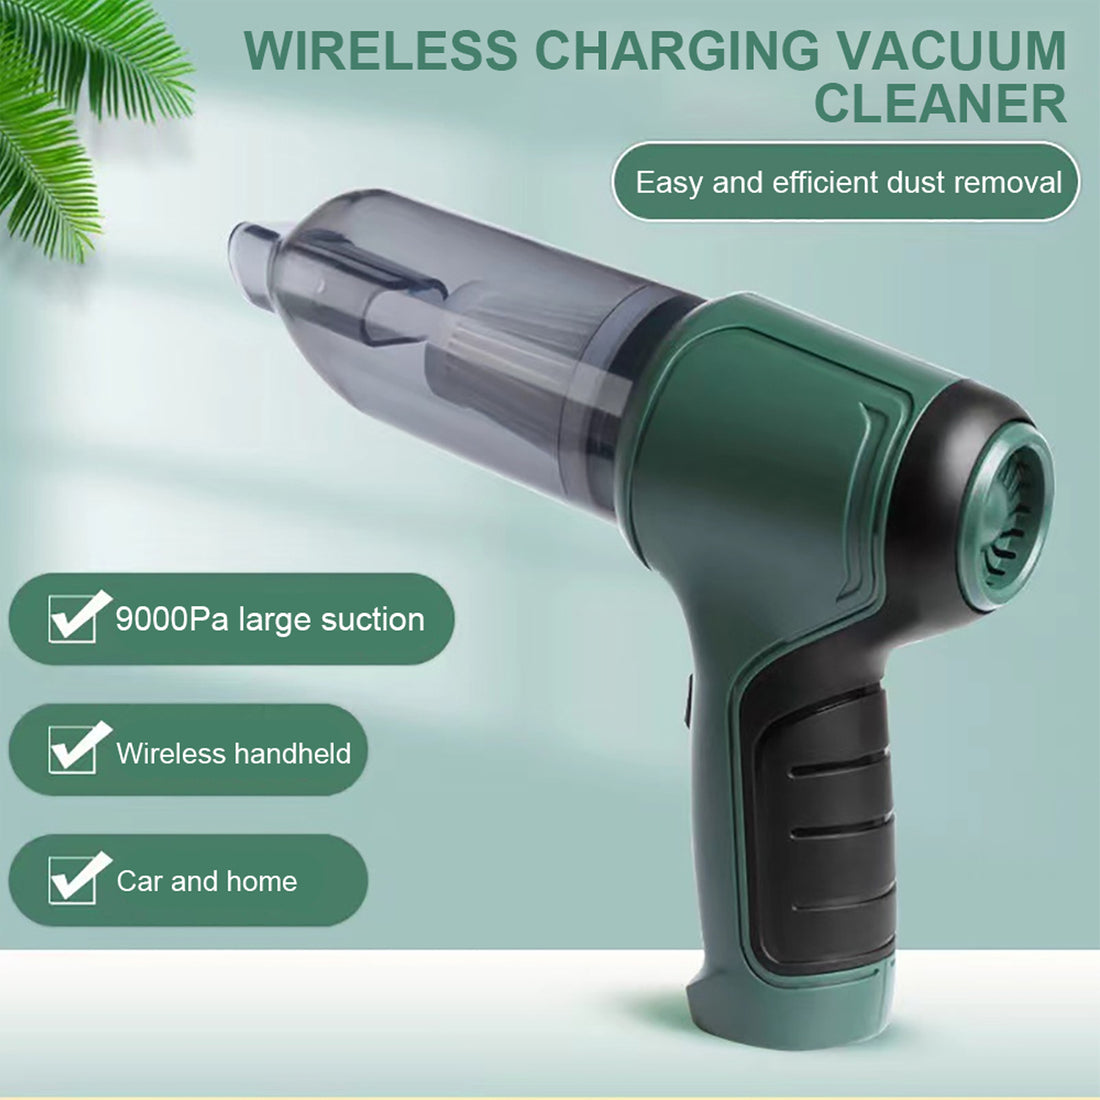 Wireless Portable Handheld Vacuum Cleaner for Home and Office Use